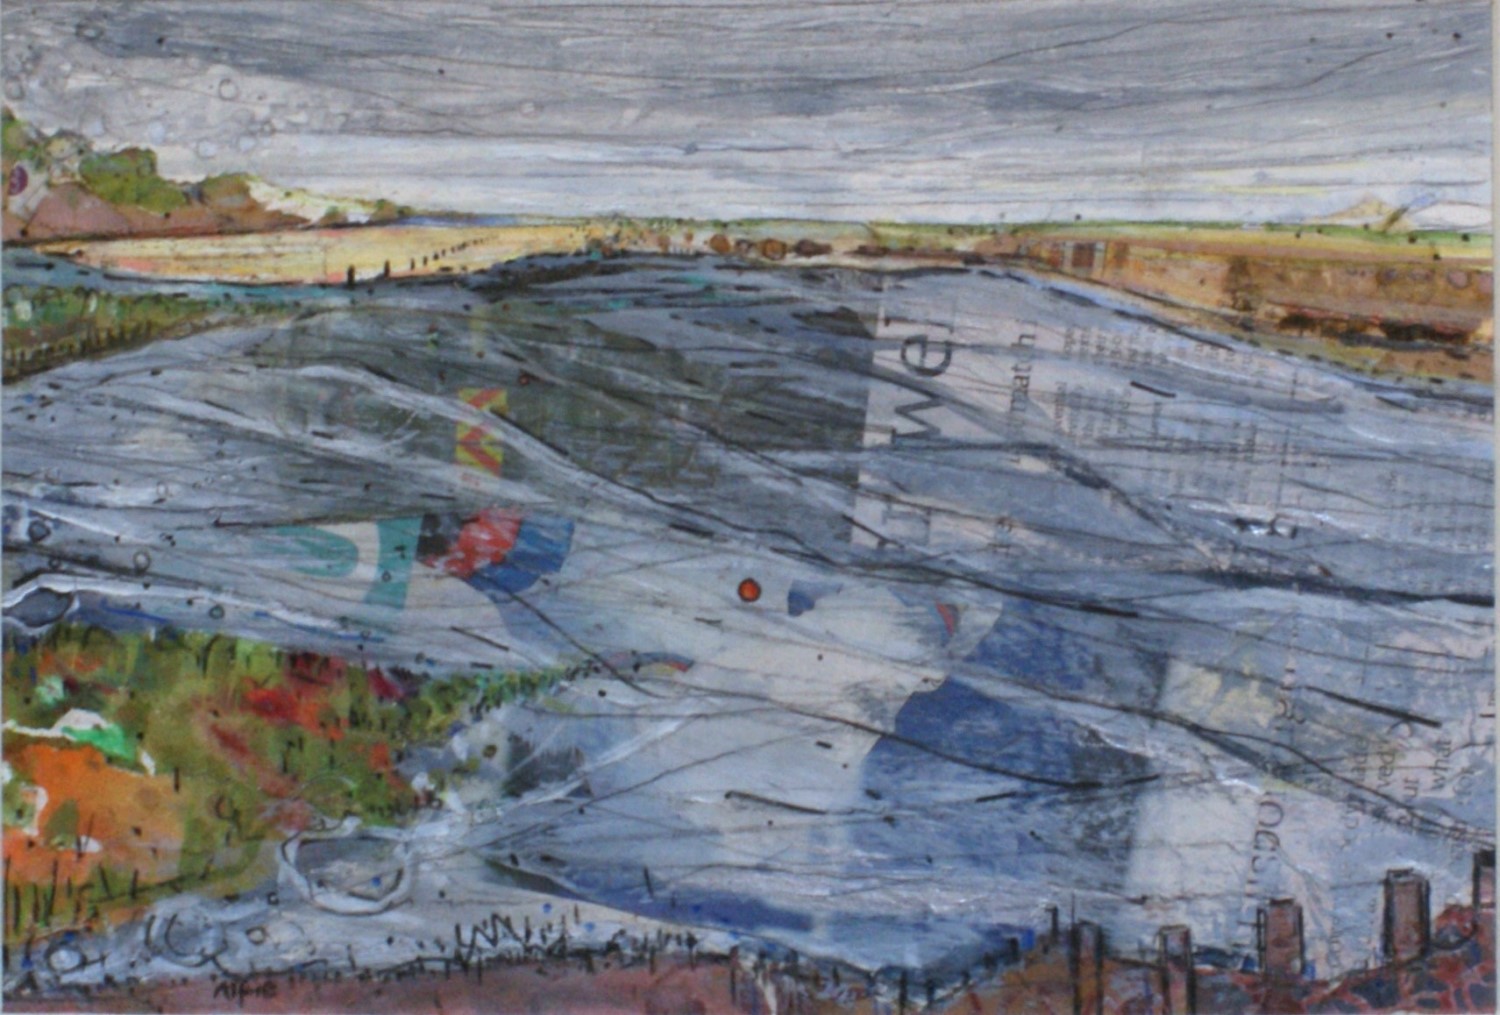 Artist Alfie Carpenter 'Wind and Waves, Scolt Head', Burnham Overy Staithe, SOLD Mixed media, 8 x 14 (Paint Out Wells 2016) photo by Katy Jon Went